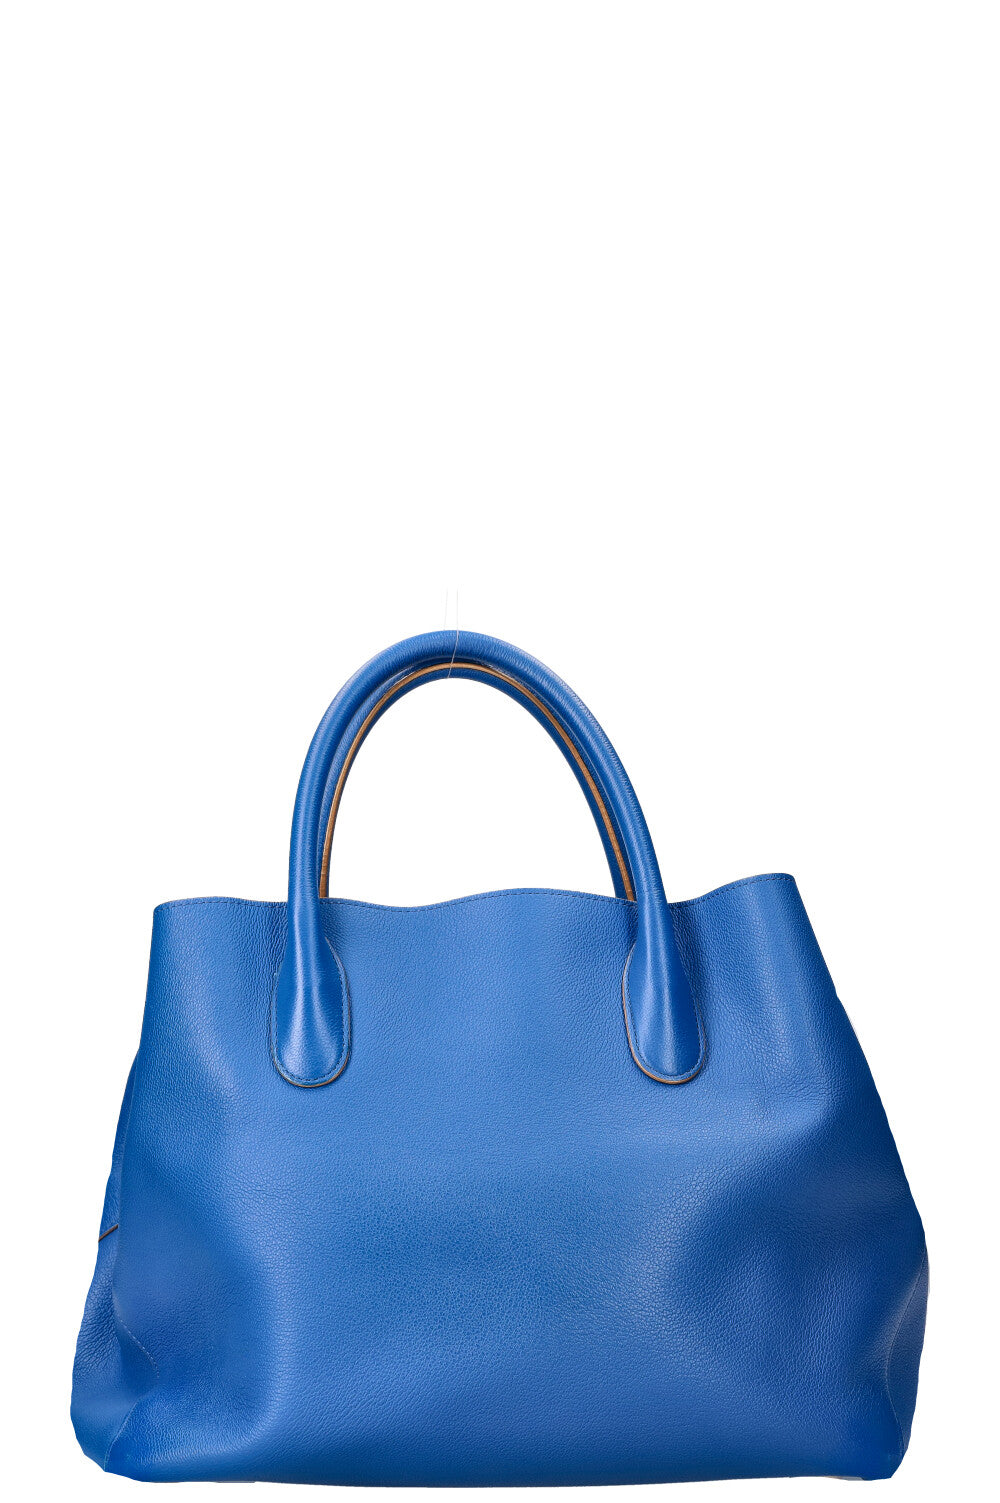 CHRISTIAN DIOR Open Bar Tote Large Blue